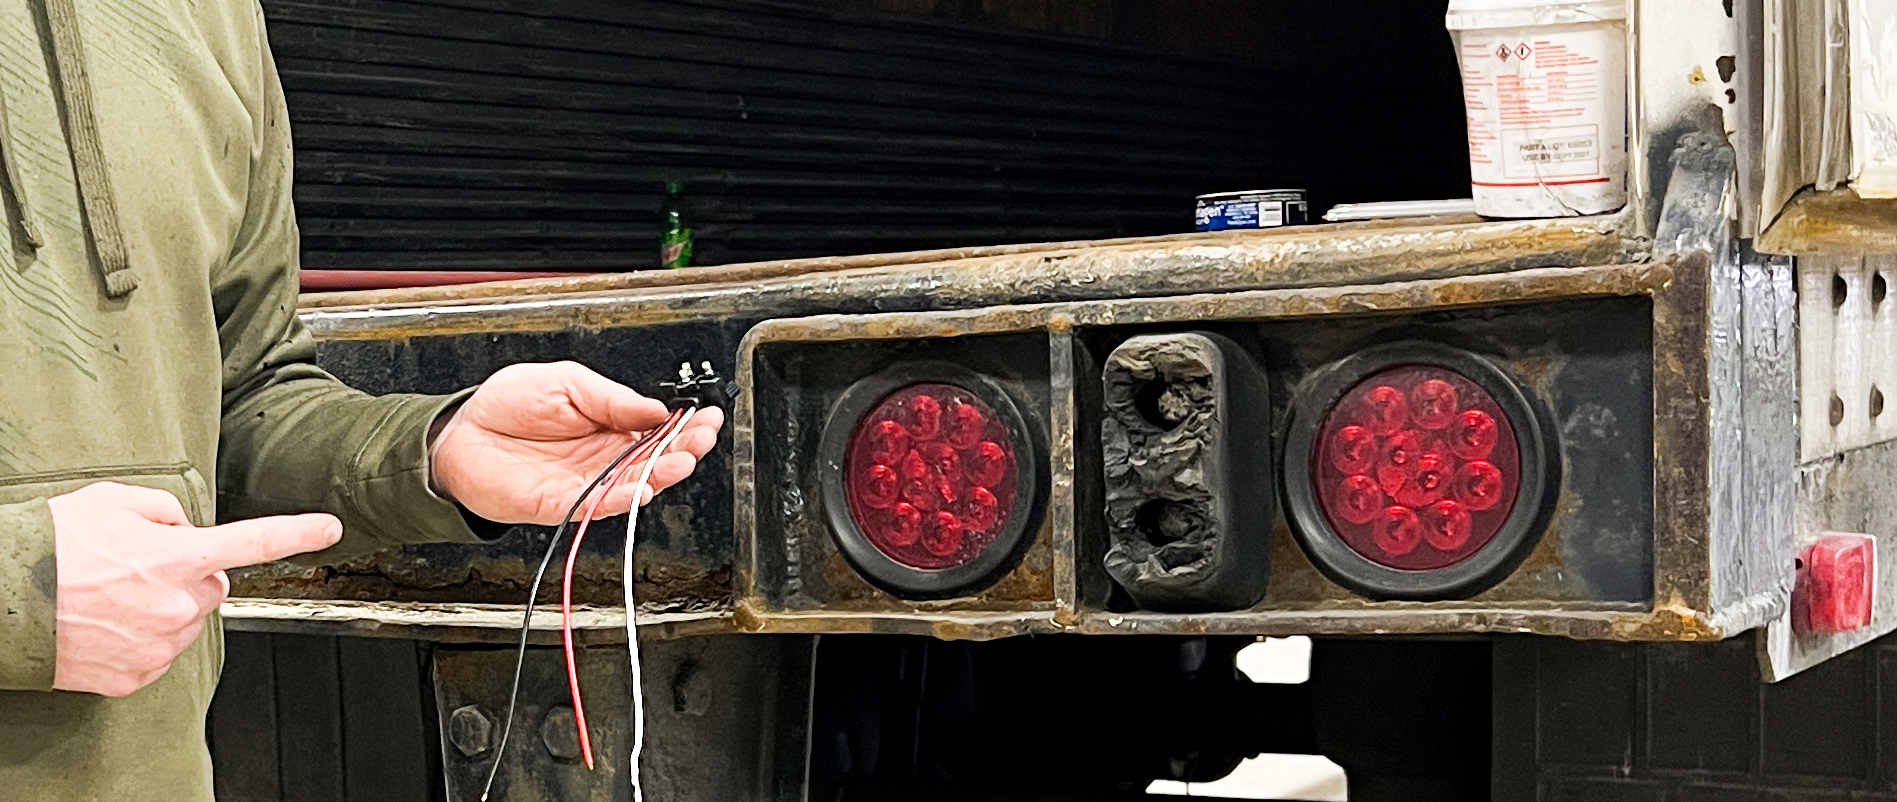 five-steps-to-change-a-pigtail-on-a-light-semi-trailer-hub-with-oil